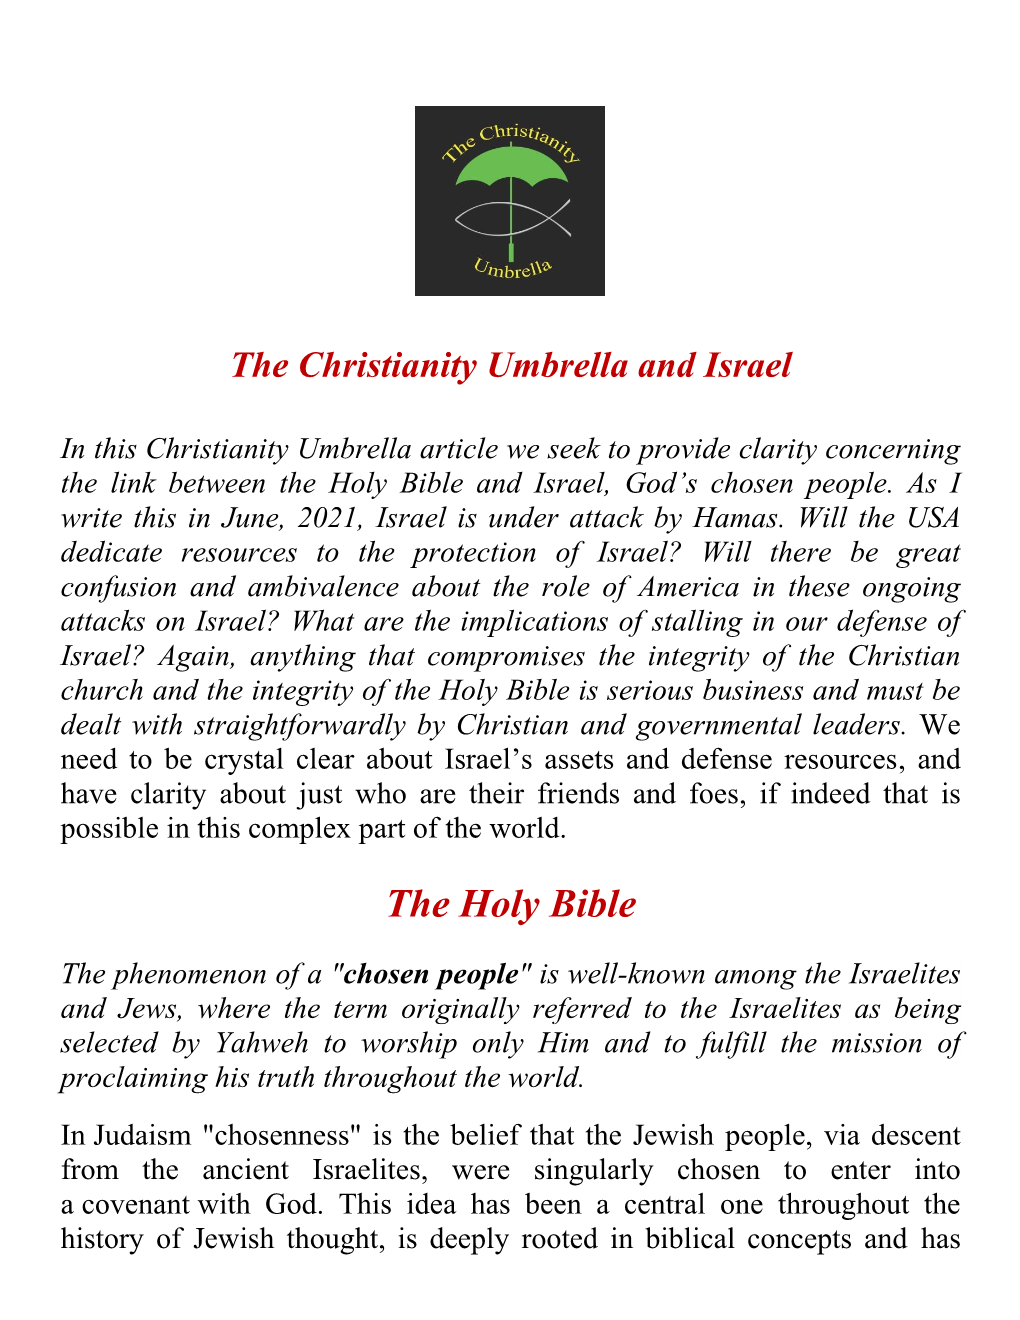 The Holy Bible and Israel, God’S Chosen People